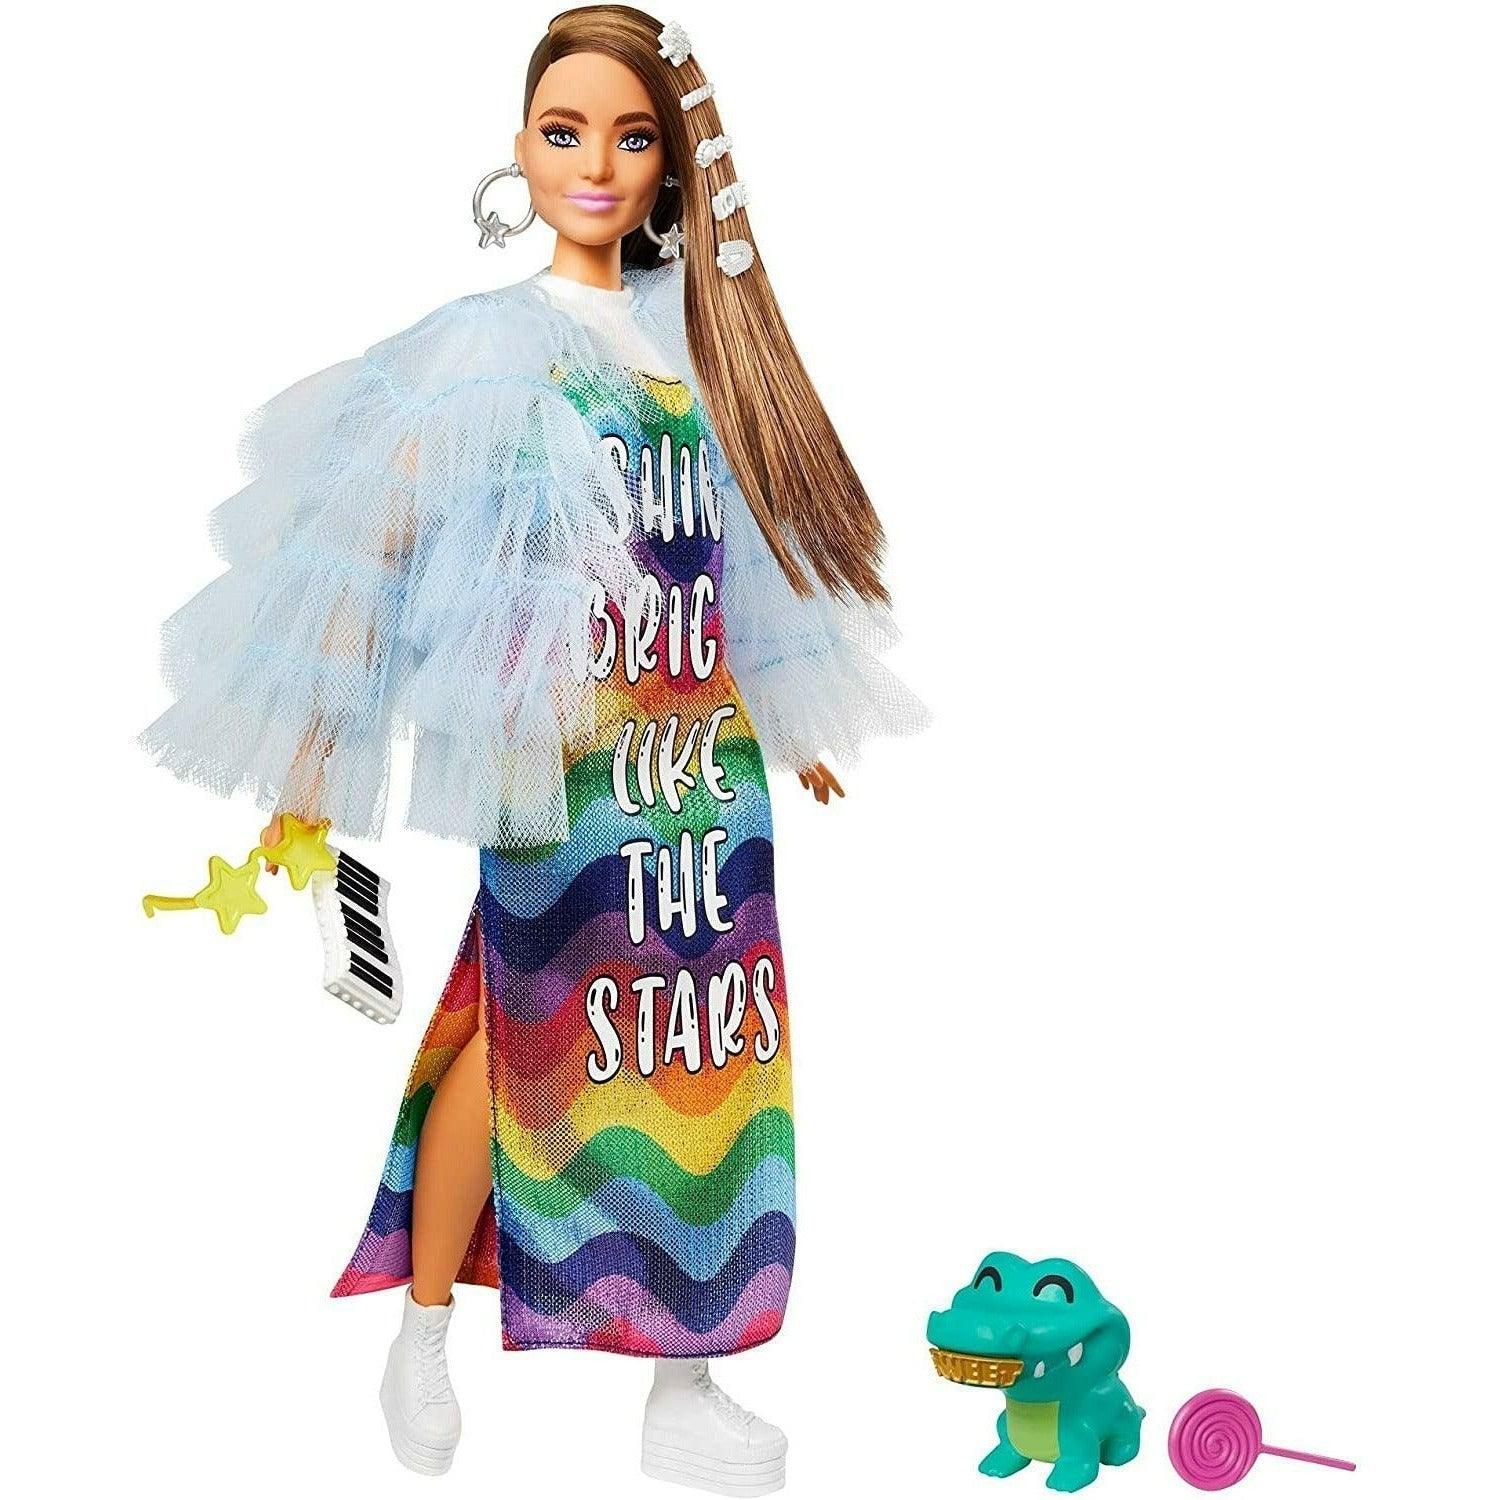 Barbie Extra Doll #9 in Blue Ruffled Jacket with Pet Crocodile, Long Brunette Hair with Bling Hair Clips, Layered Outfit & Accessories - BumbleToys - 5-7 Years, Barbie, Dolls, Fashion Dolls & Accessories, Girls, OXE, Pre-Order